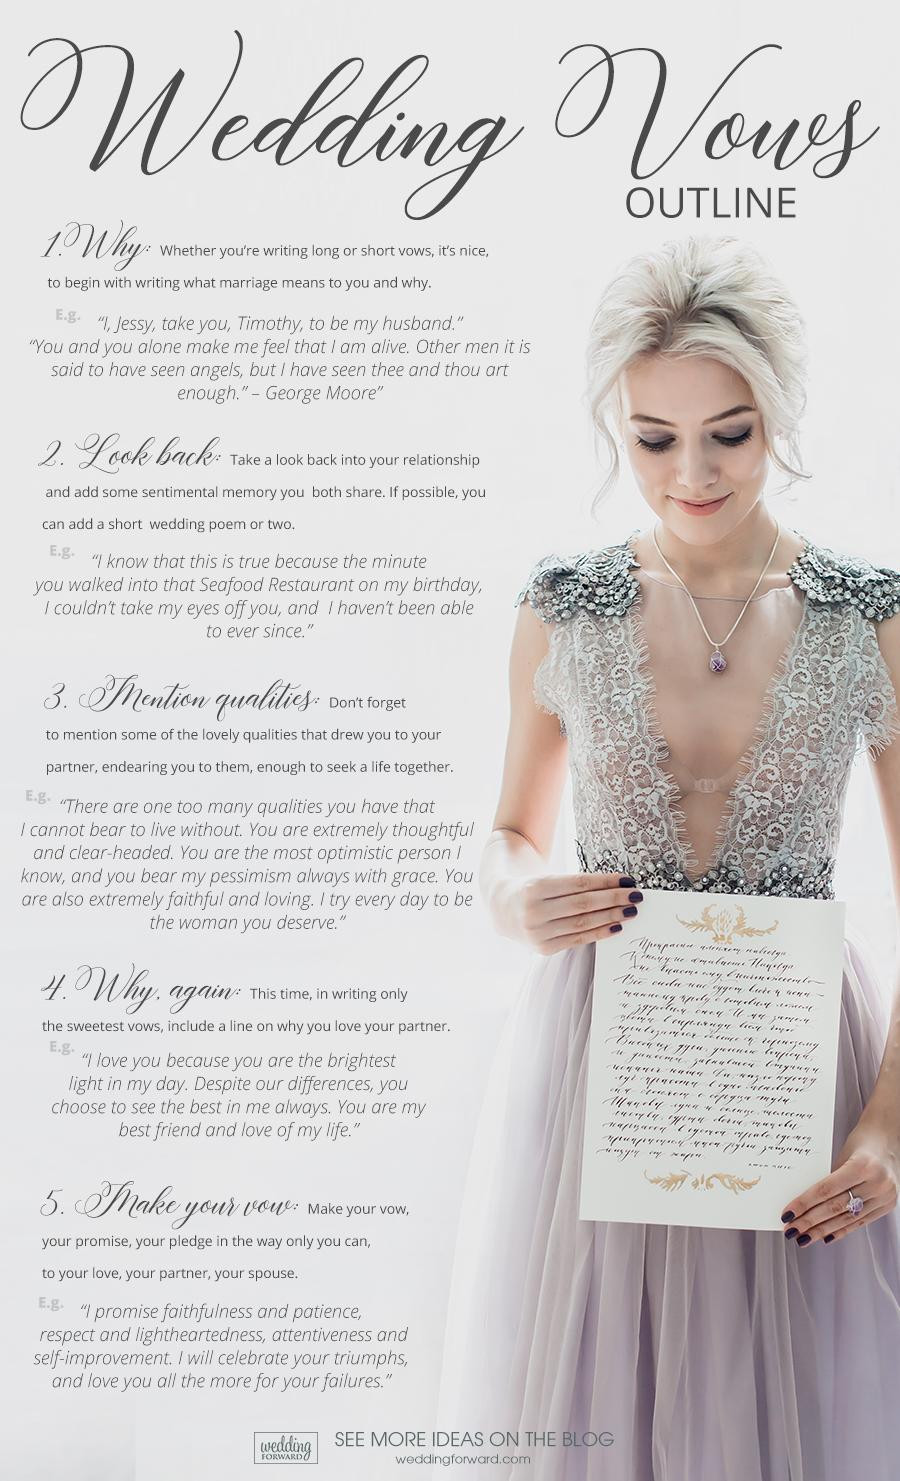 Best Wedding Vows For Her
 59 Wedding Vows For Her Examples And Outline